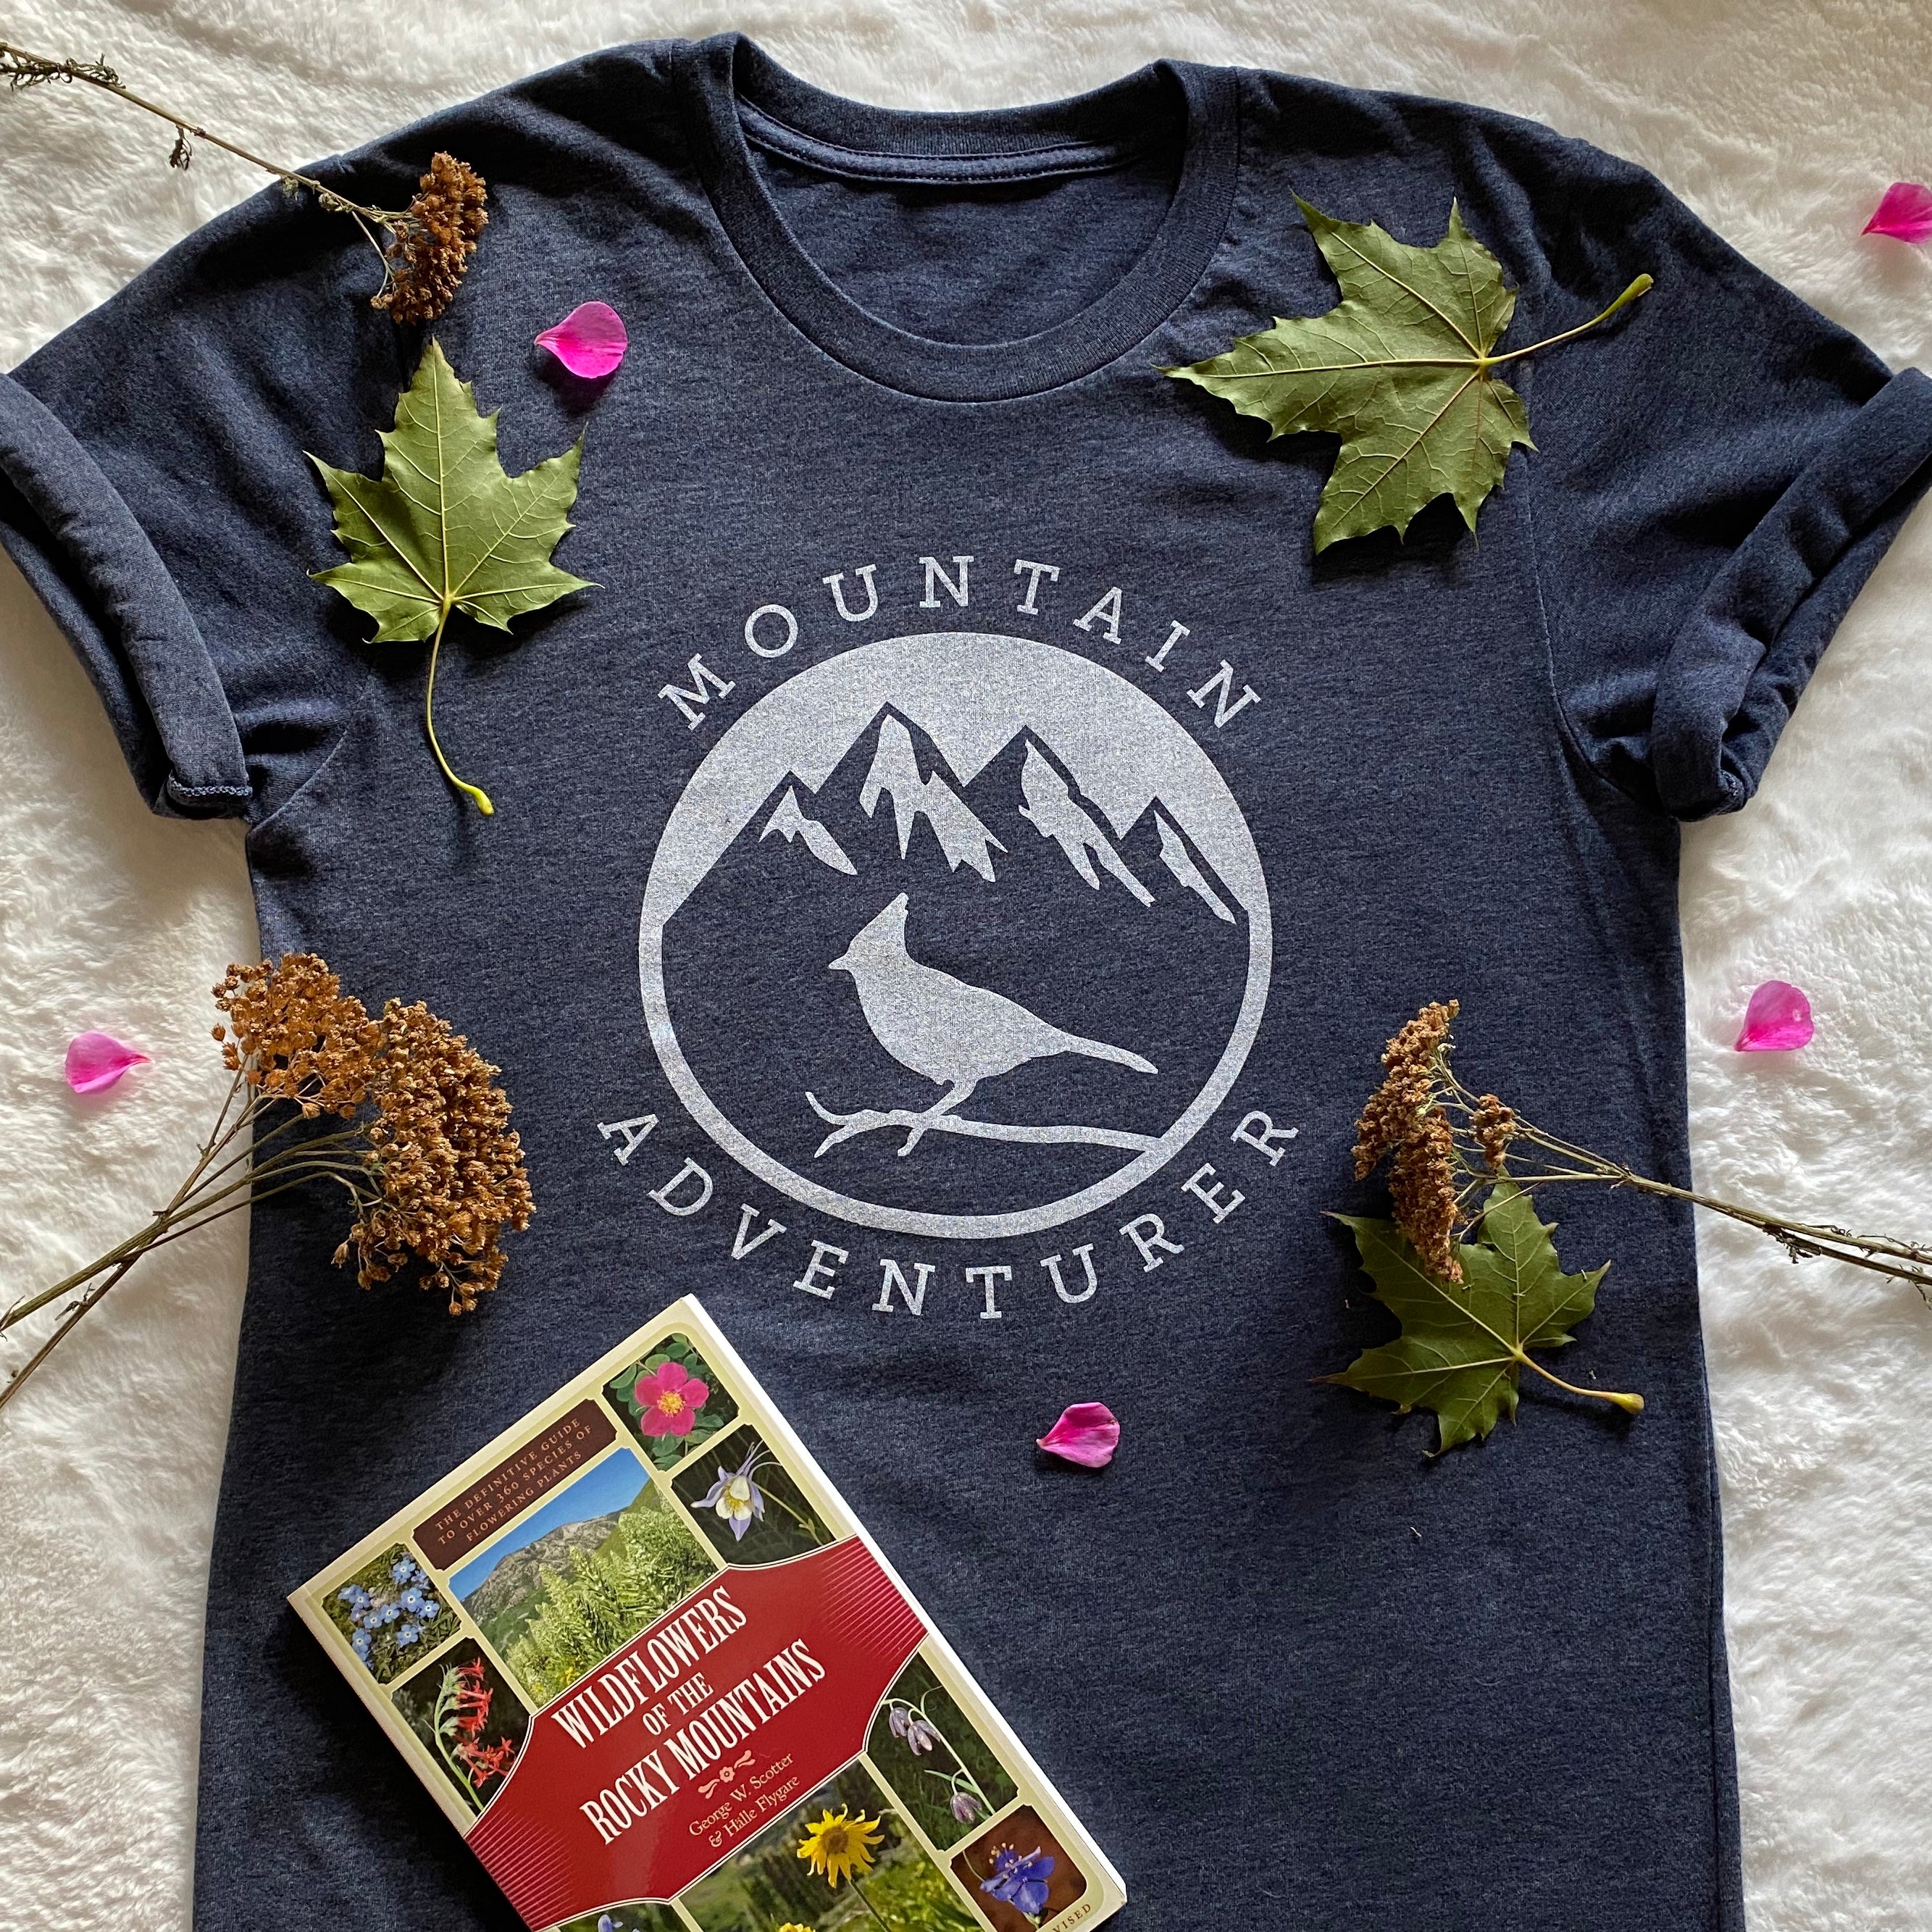 This navy t-shirt has a white silhouette of a Steller's Jay bird perched on a branch against a backdrop of mountains with snowy peaks.